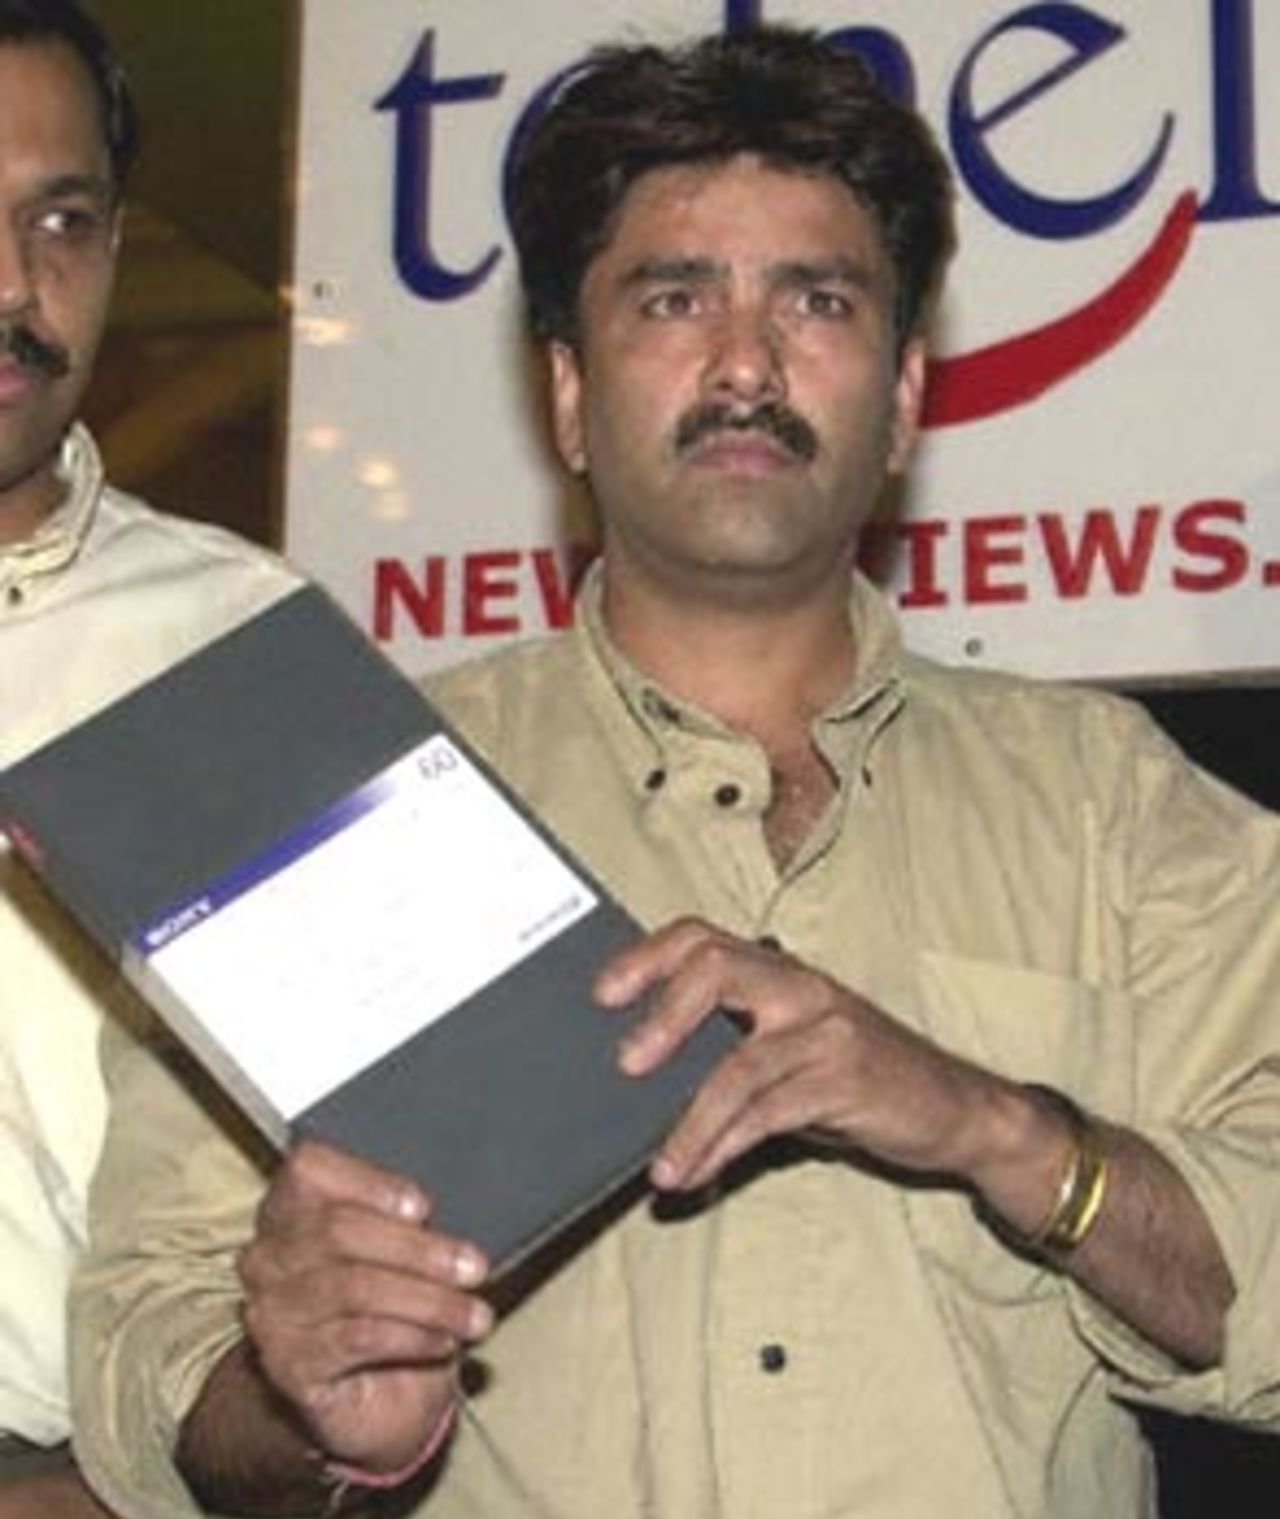 Former Indian all-round cricketer Manoj Prabhakar exhibits a video tape at a press conference in New Delhi, 27 May 2000, to press his match-fixing allegations against Indian cricketing icon Kapil Dev. Prabhakar said Dev had offered him 2.5 million rupees (58,139 USD) in 1994 to throw a match against Pakistan.